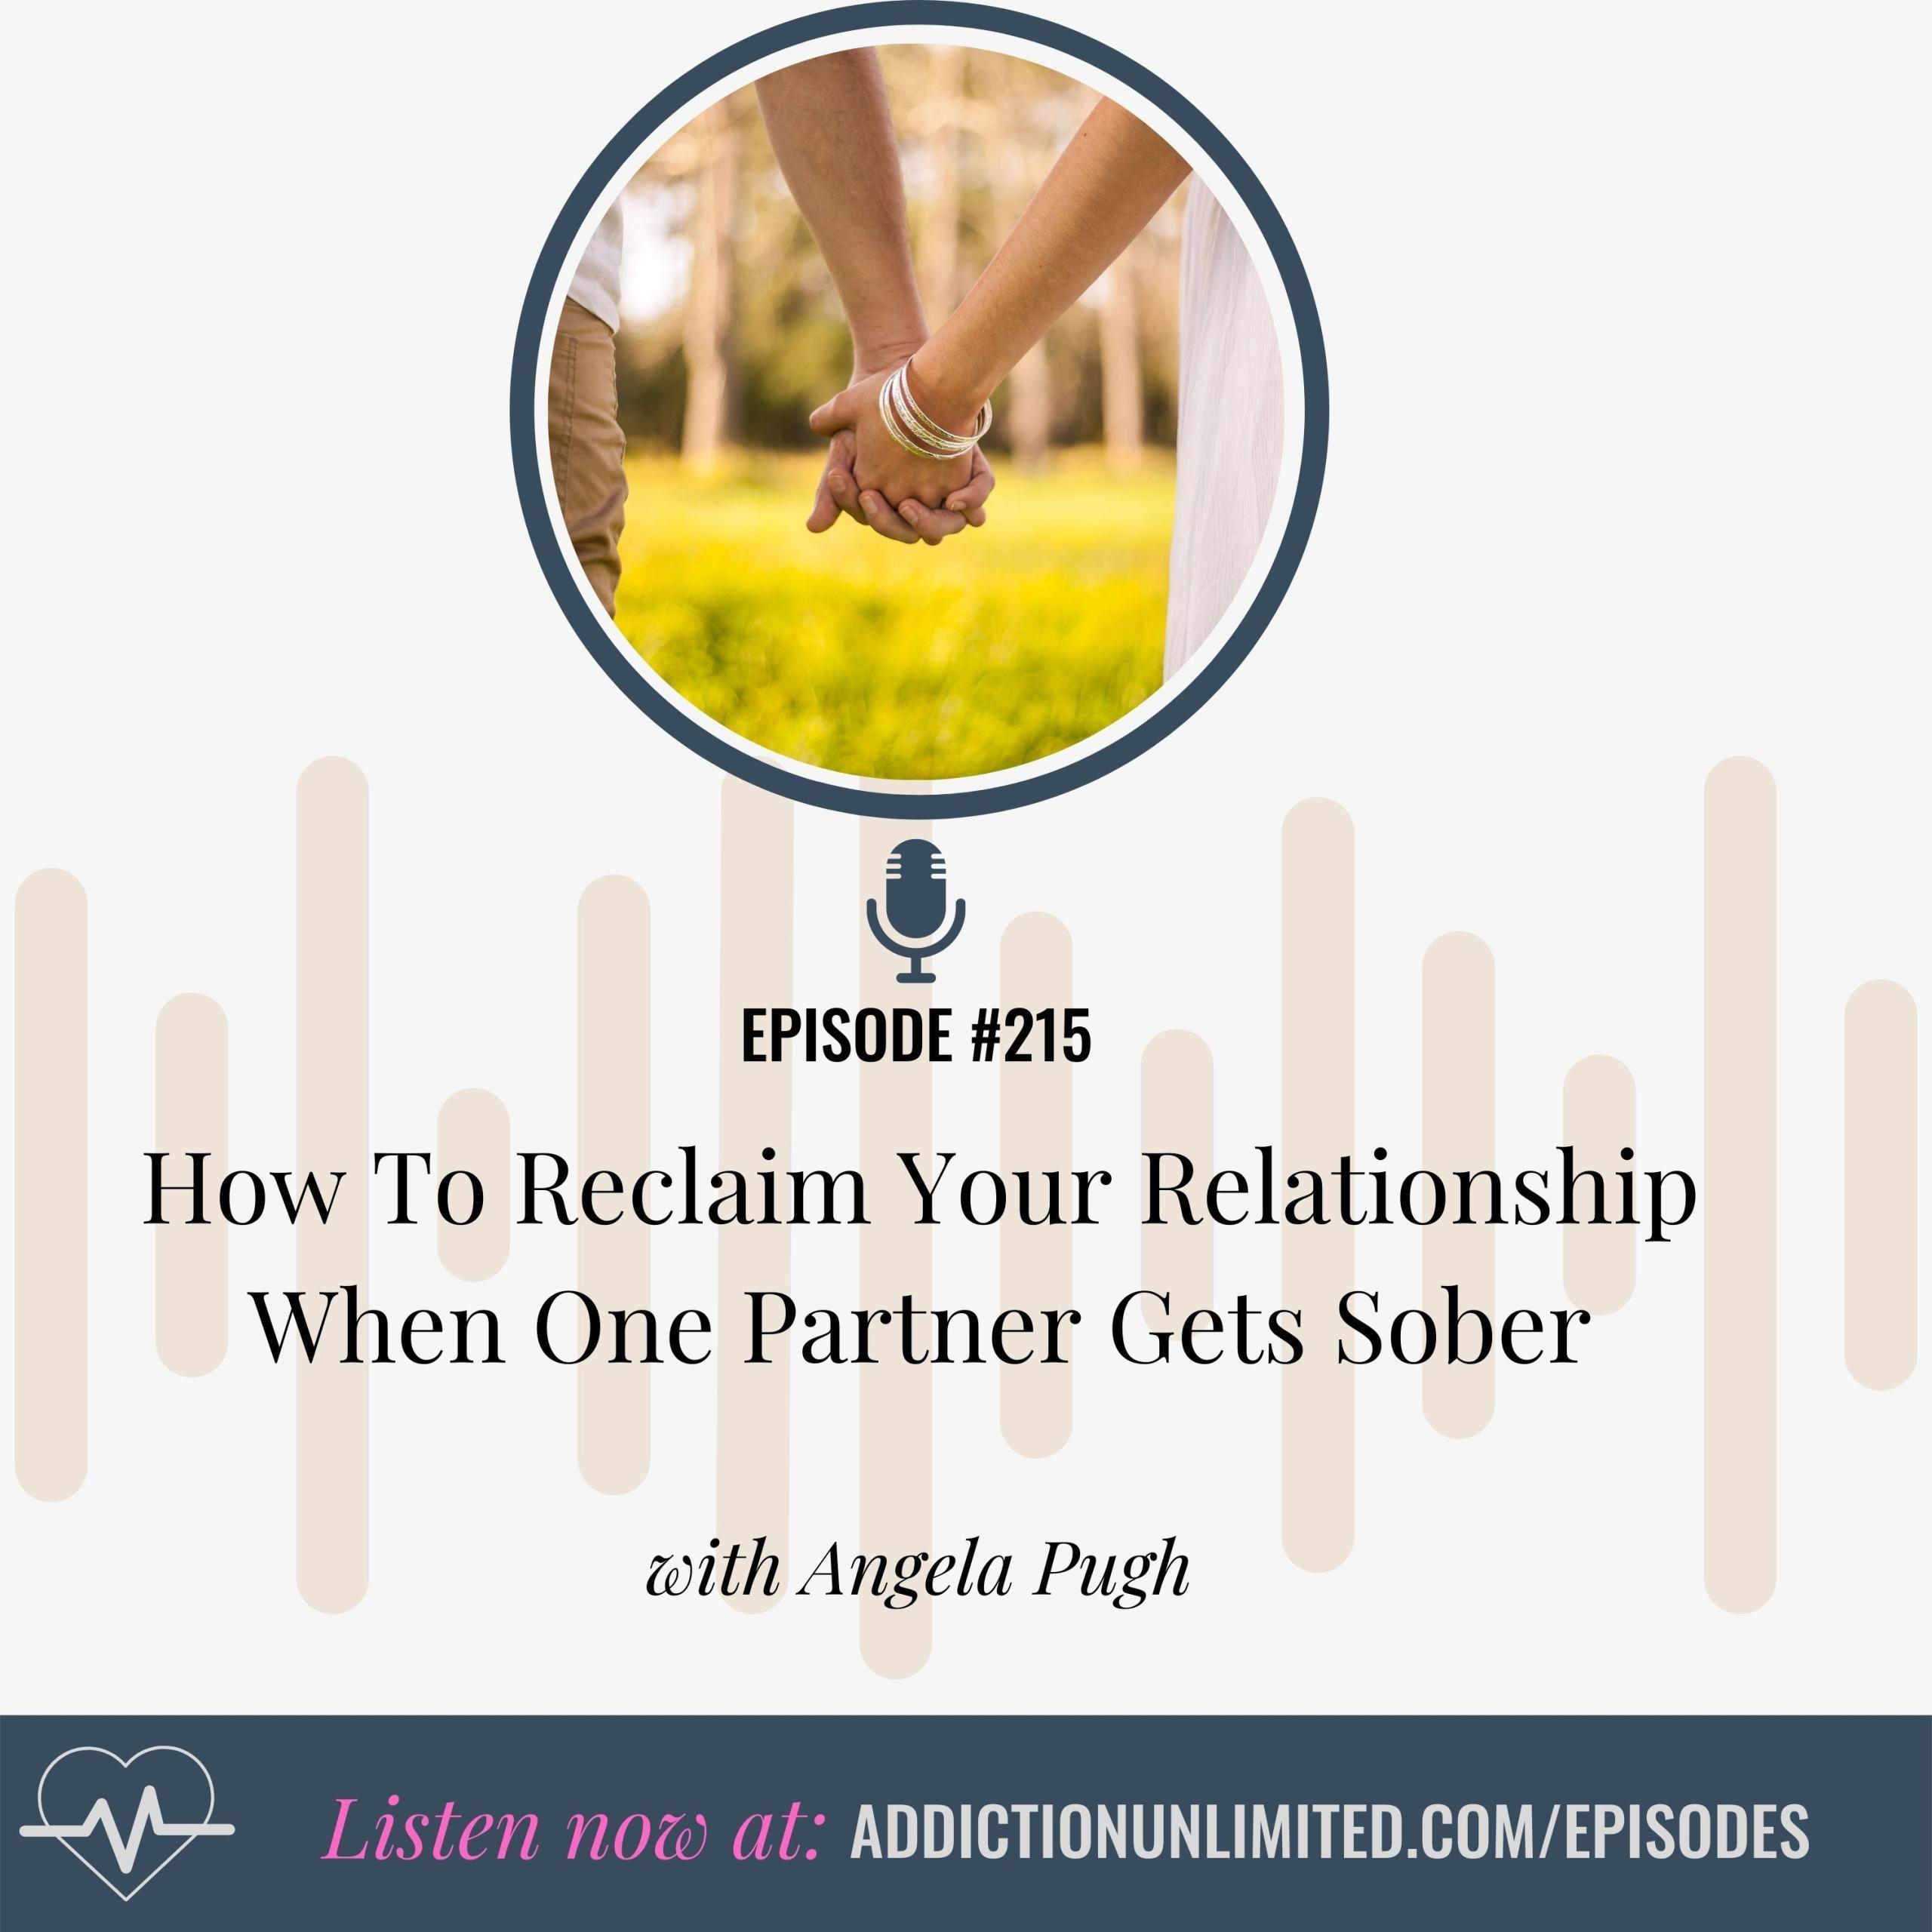 How To Reclaim Your Relationship When One Partner Gets Sober